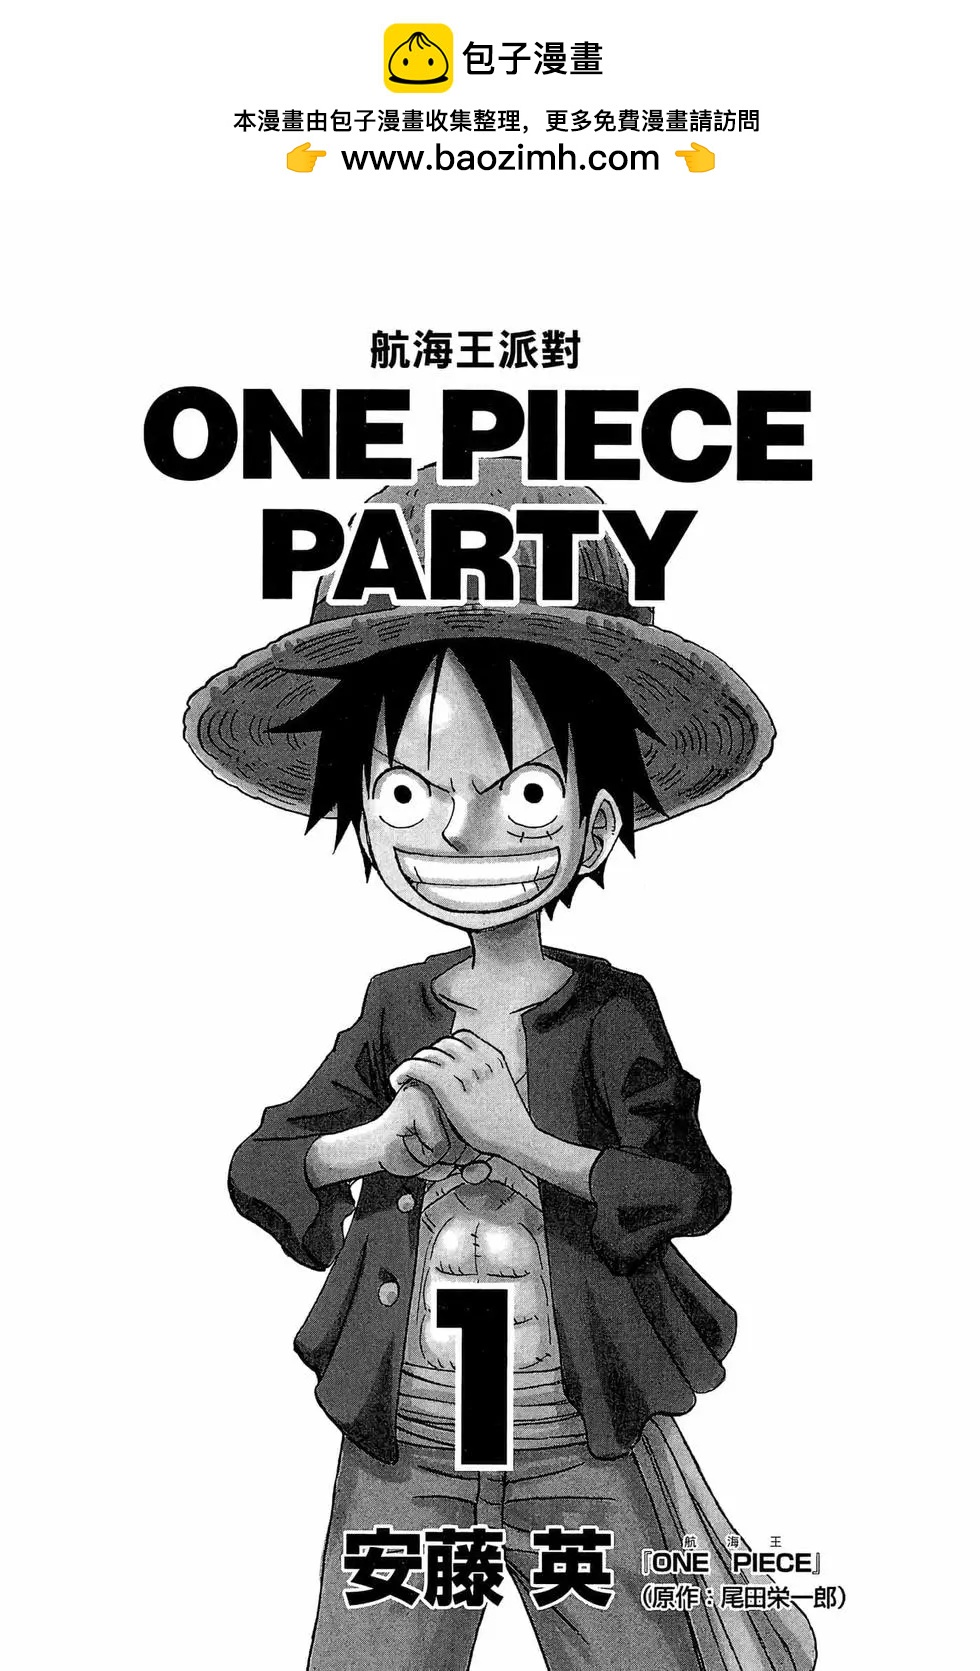 One piece party - 第01卷(1/4) - 2